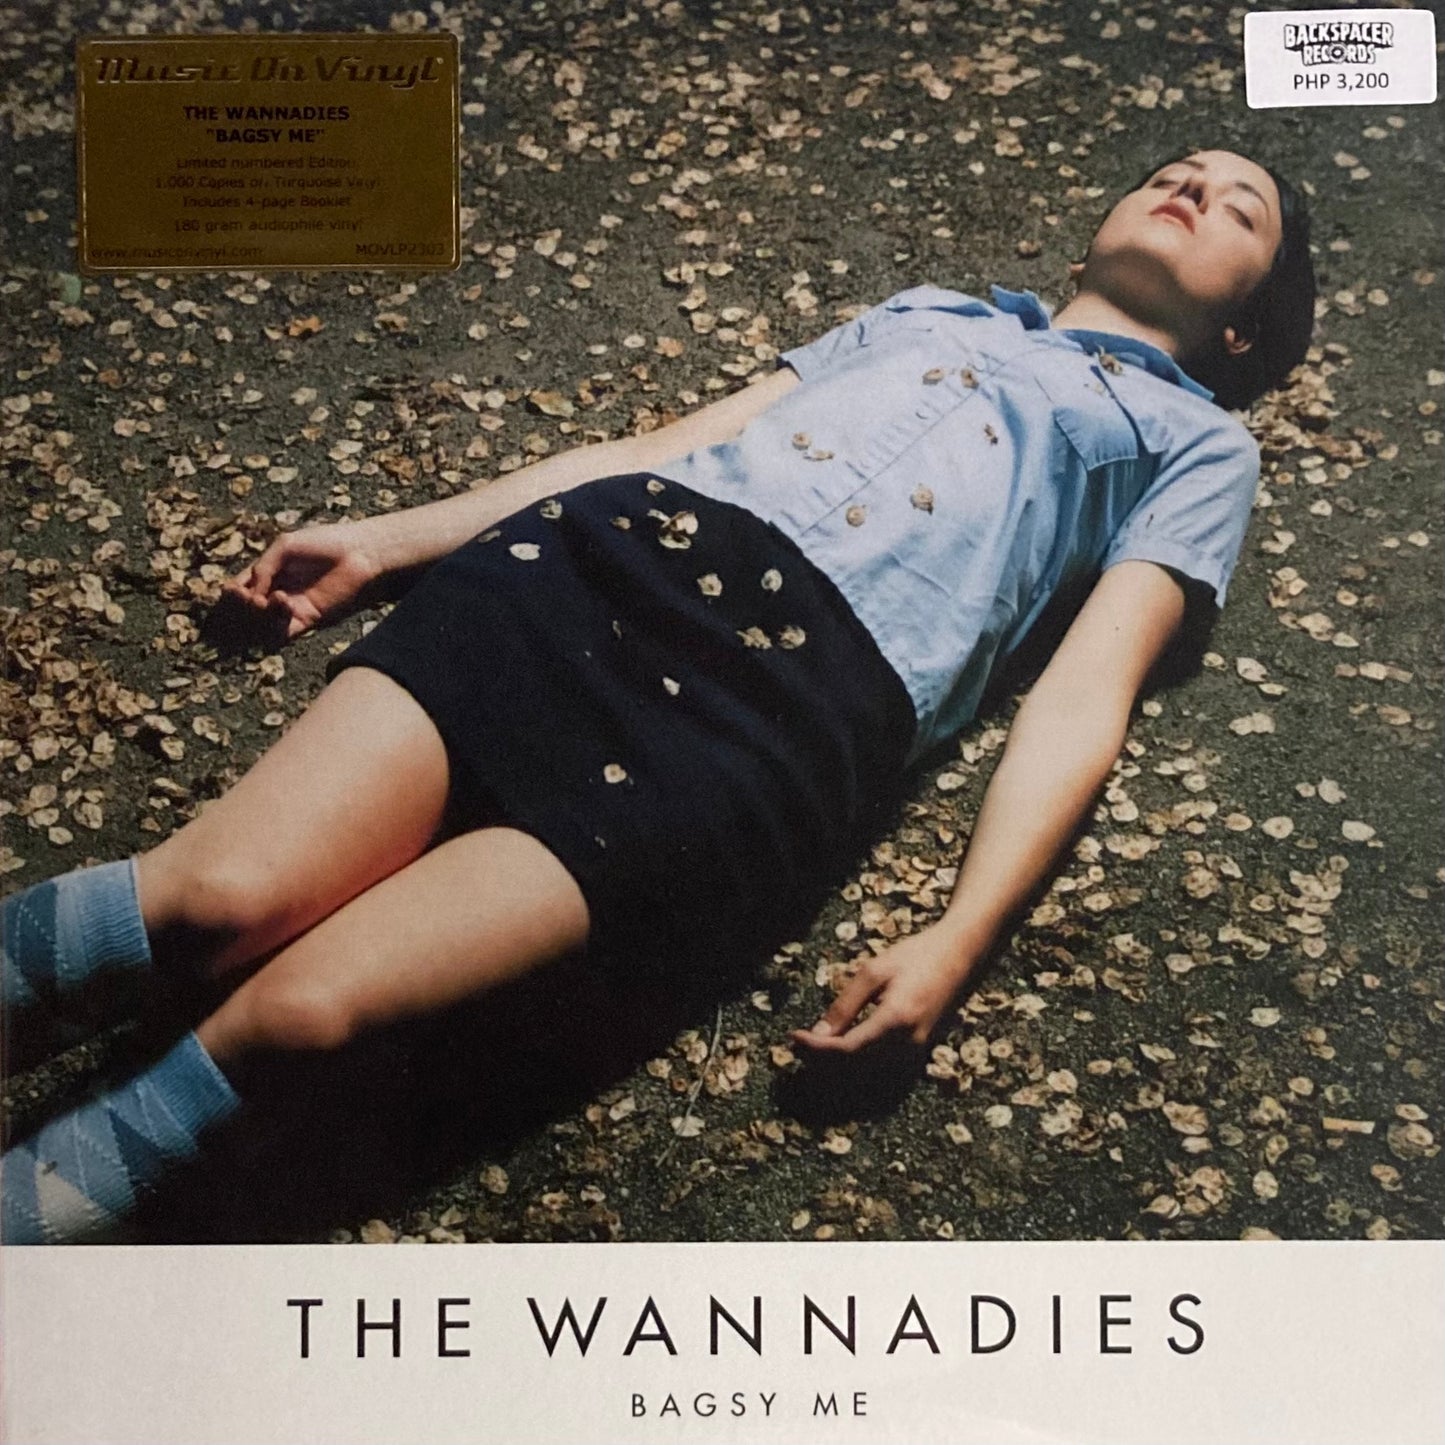 The Wannadies ‎– Bagsy Me (Limited Edition) LP (MOV)